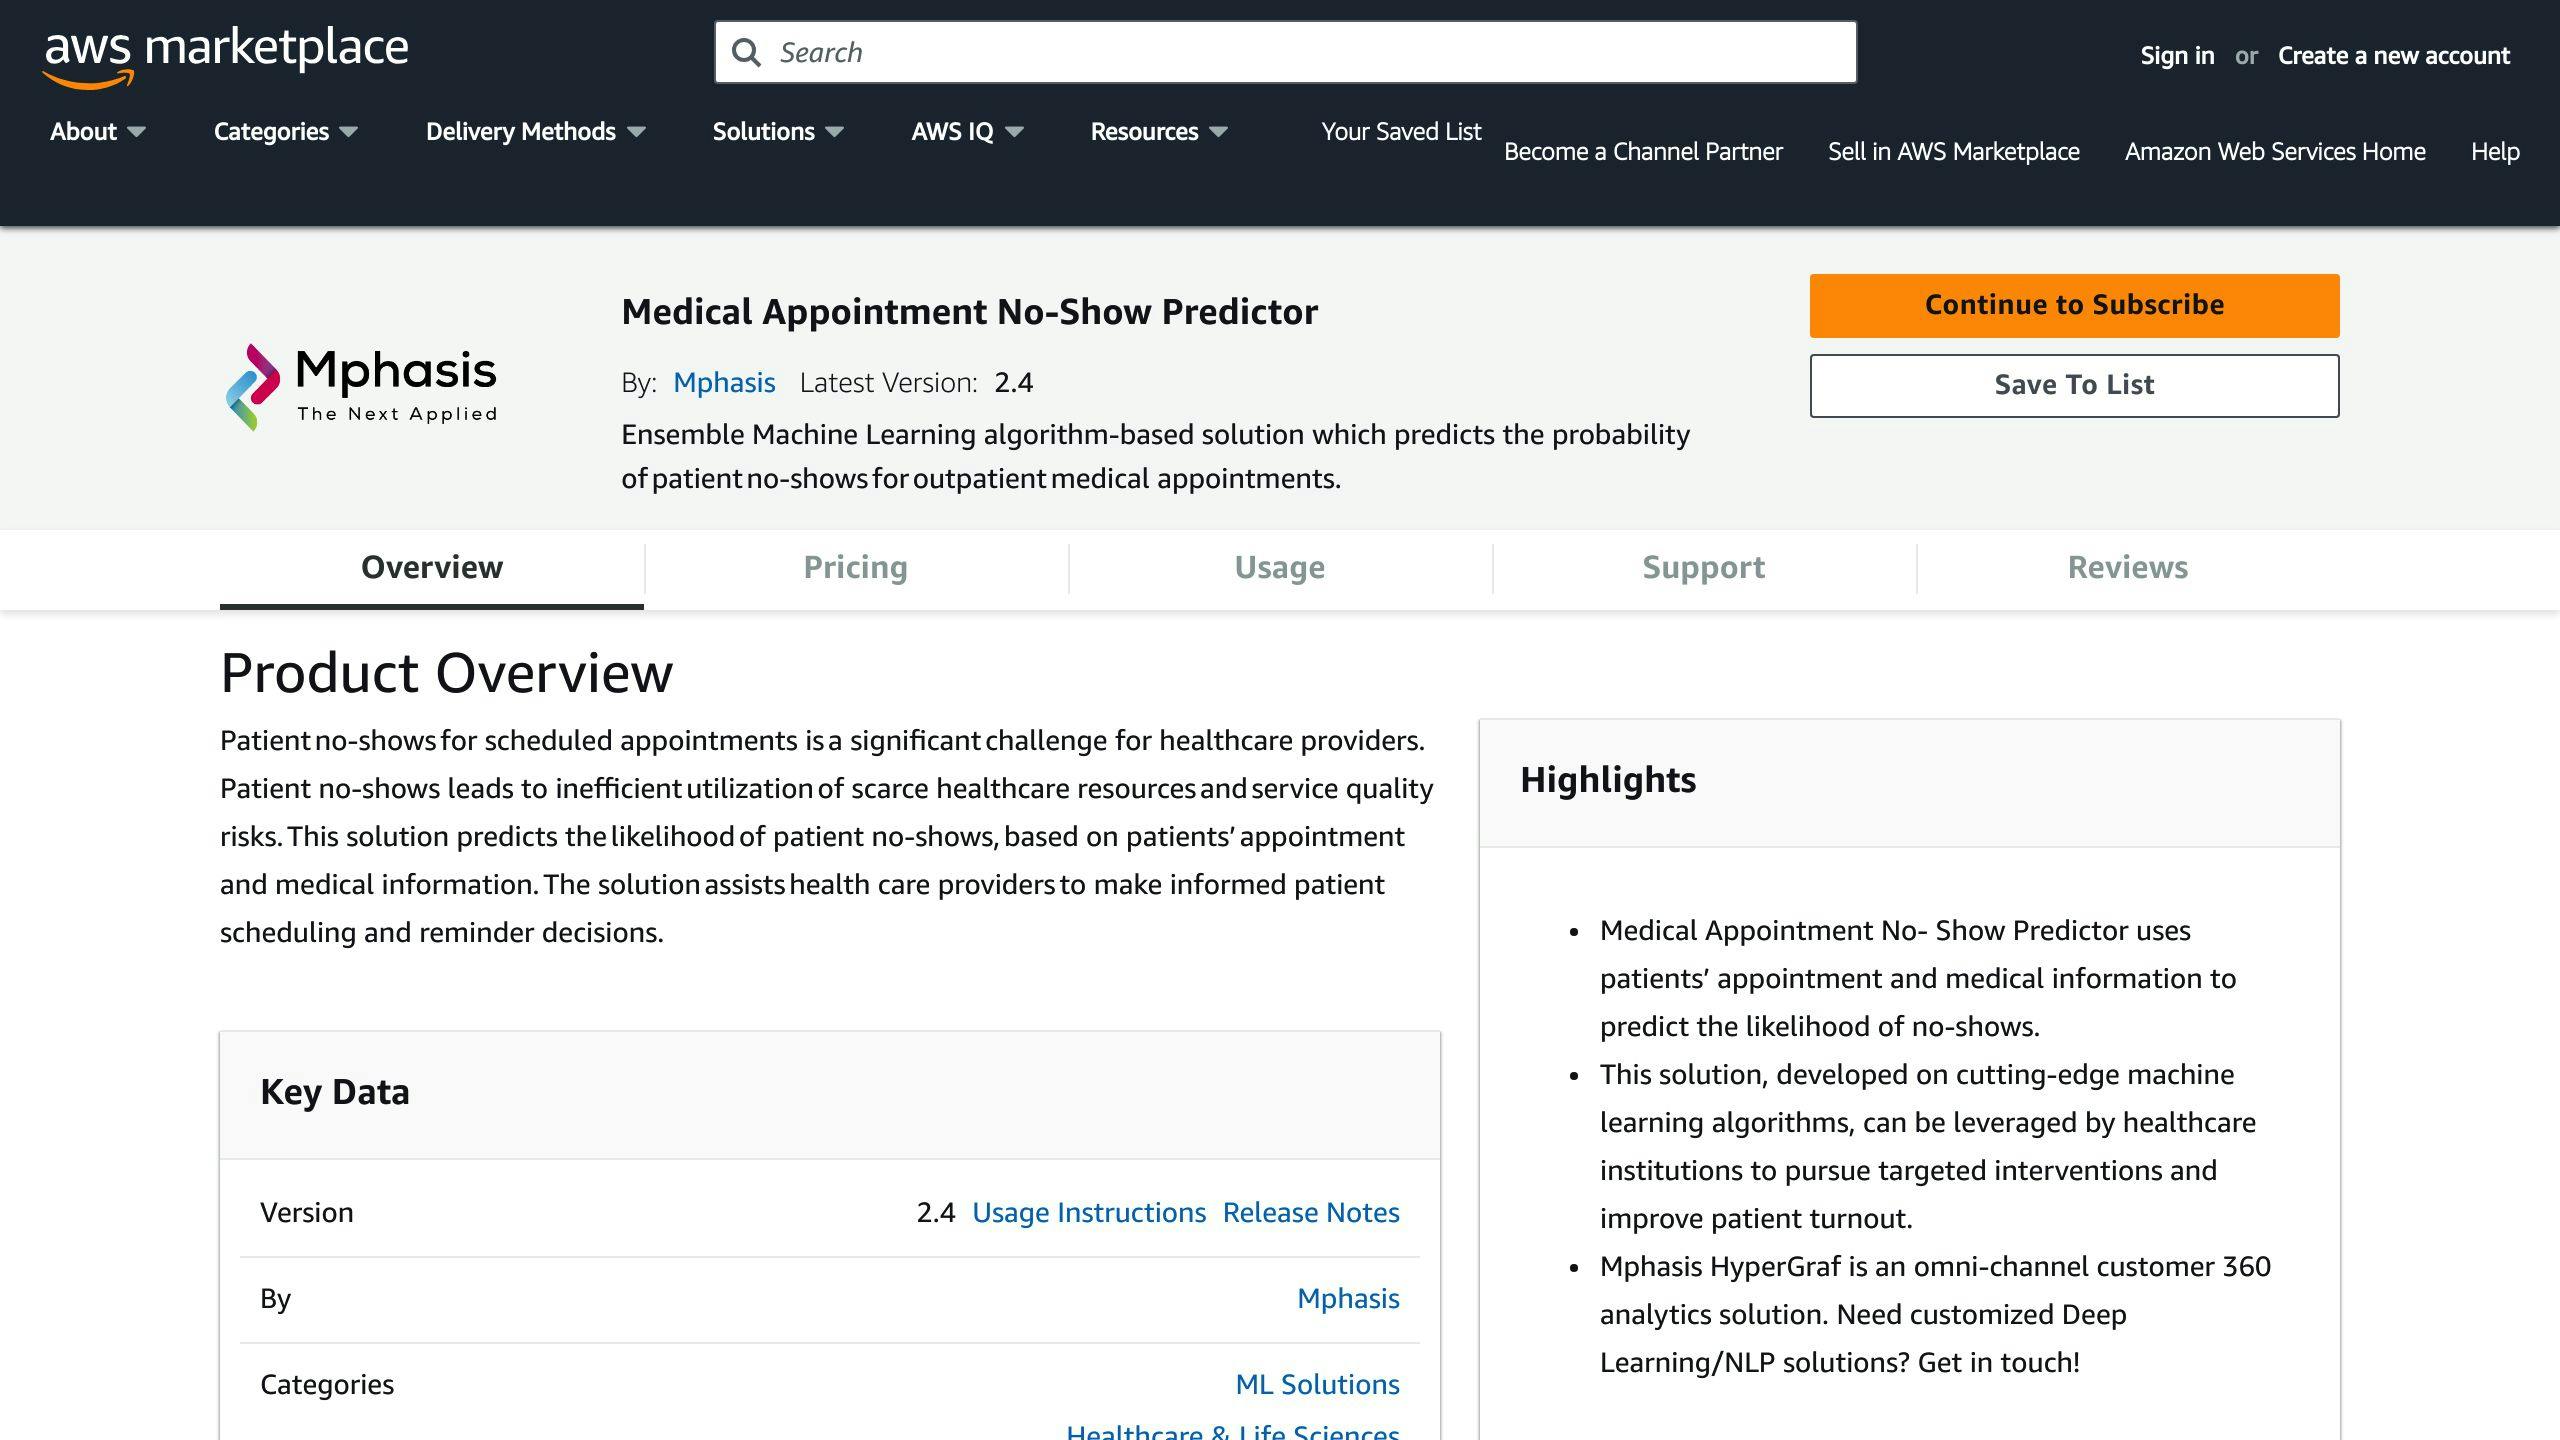 AWS Marketplace Medical Appointment No-Show Predictor